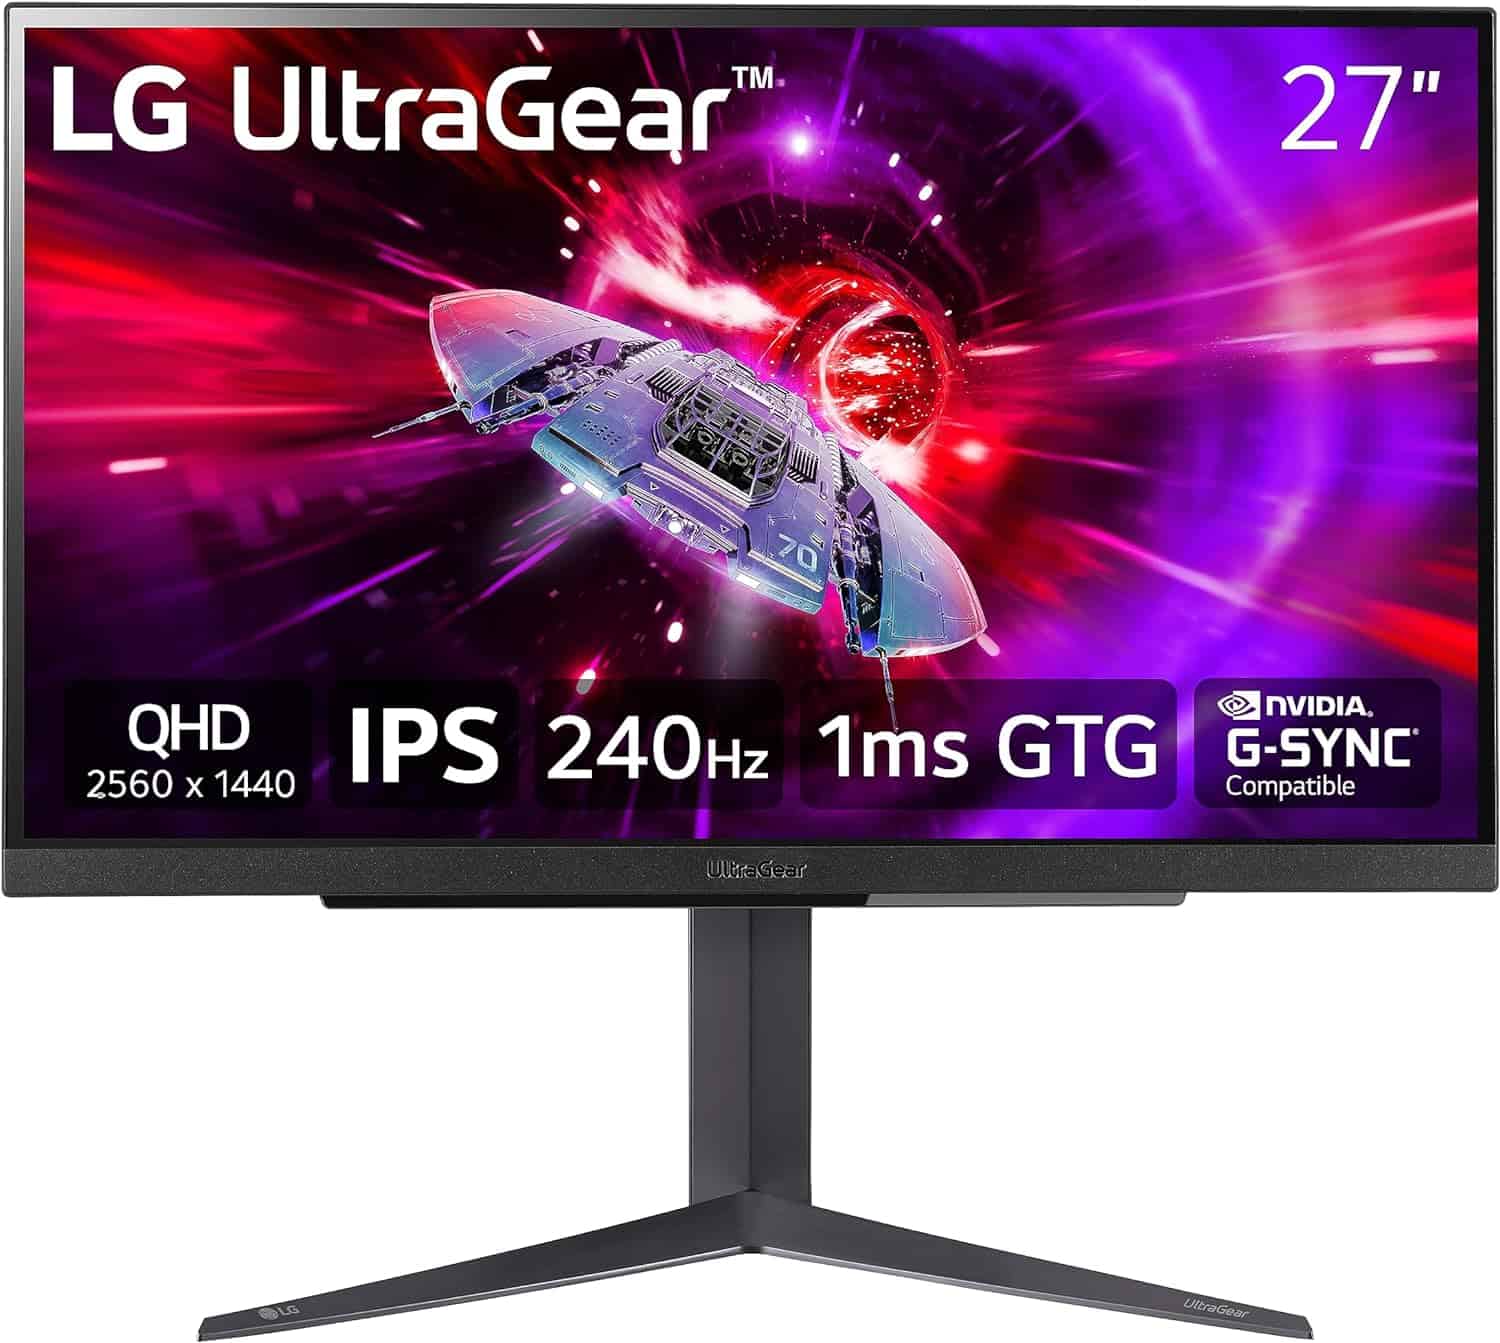 slashes price of 1440p curved gaming monitor by 25% as Christmas  sale draws to a close - PC Guide